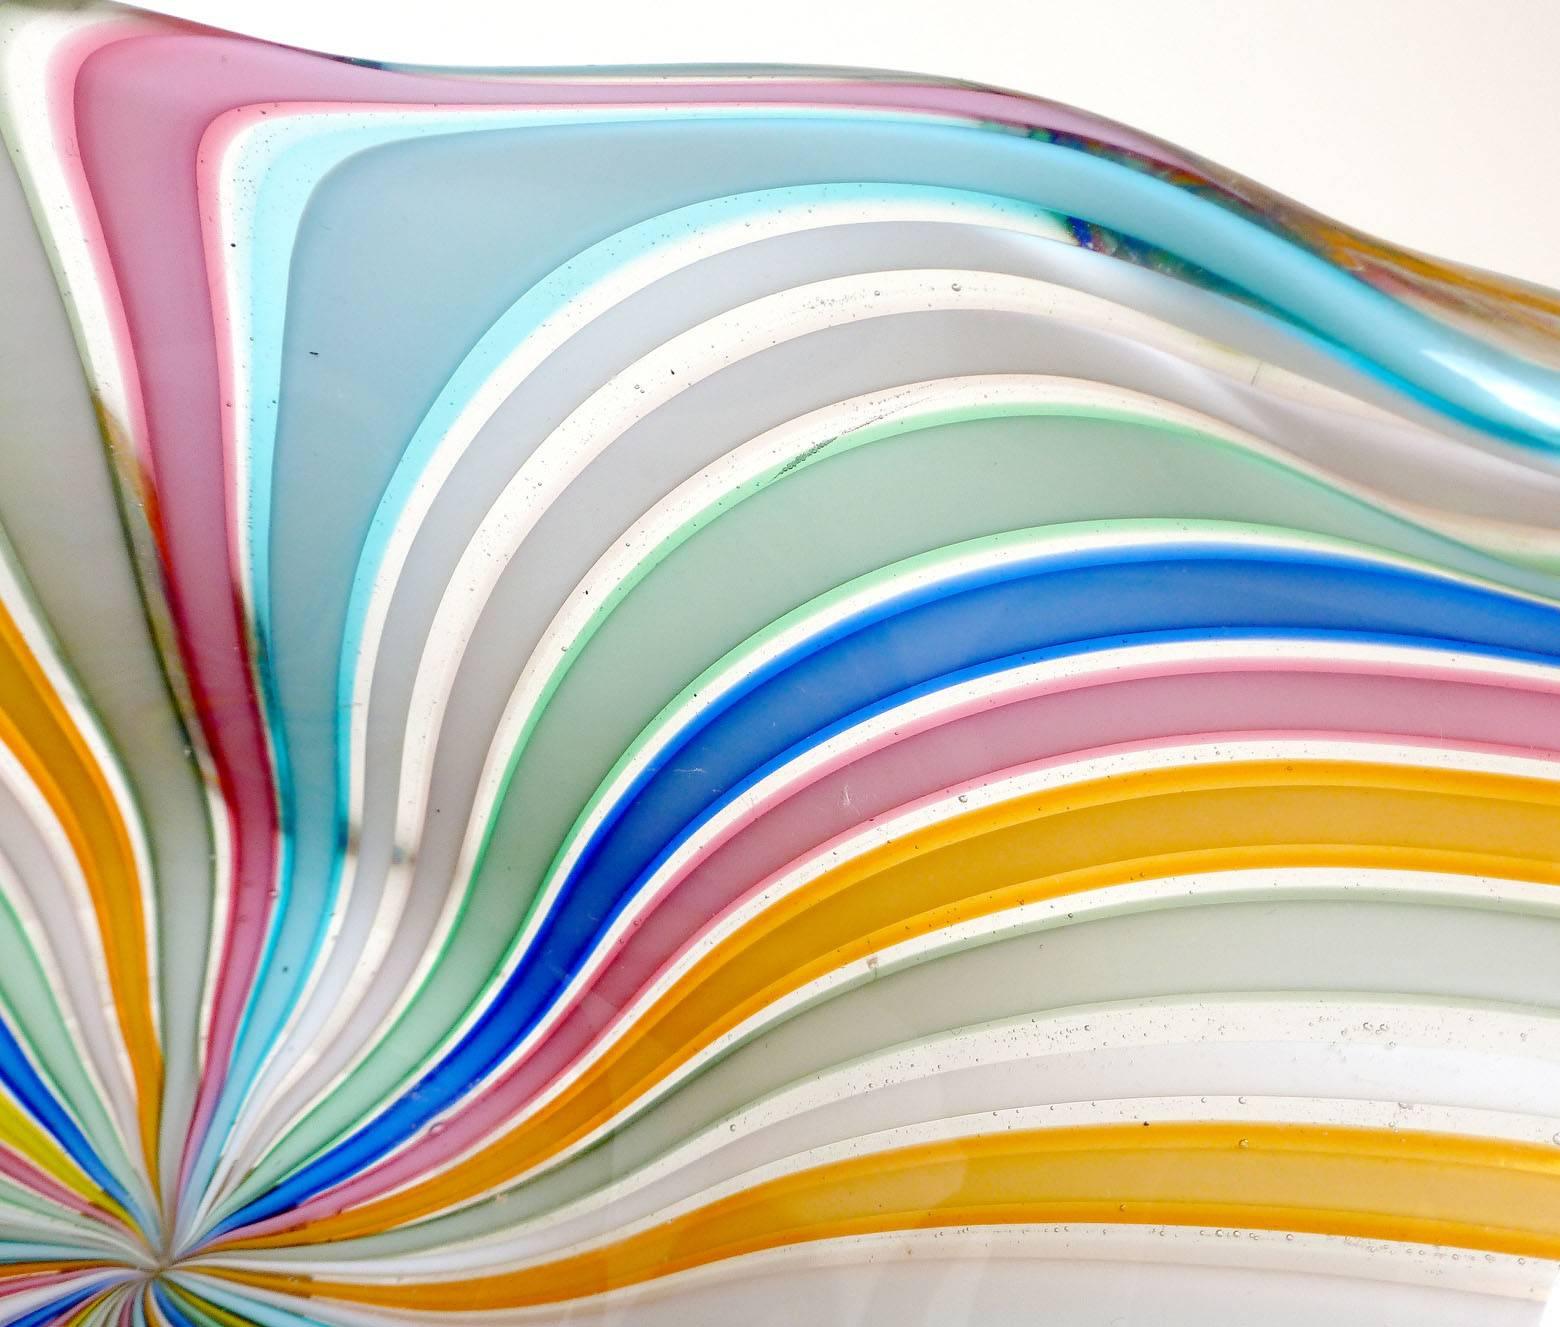 Colorful Murano hand blown rainbow Filigrana ribbons art glass bowl. Documented to designer Fratelli Toso, retaining an intact original label as shown. It has an organic shape, with white, pink, orange, light blue, gray, and green colors. Great